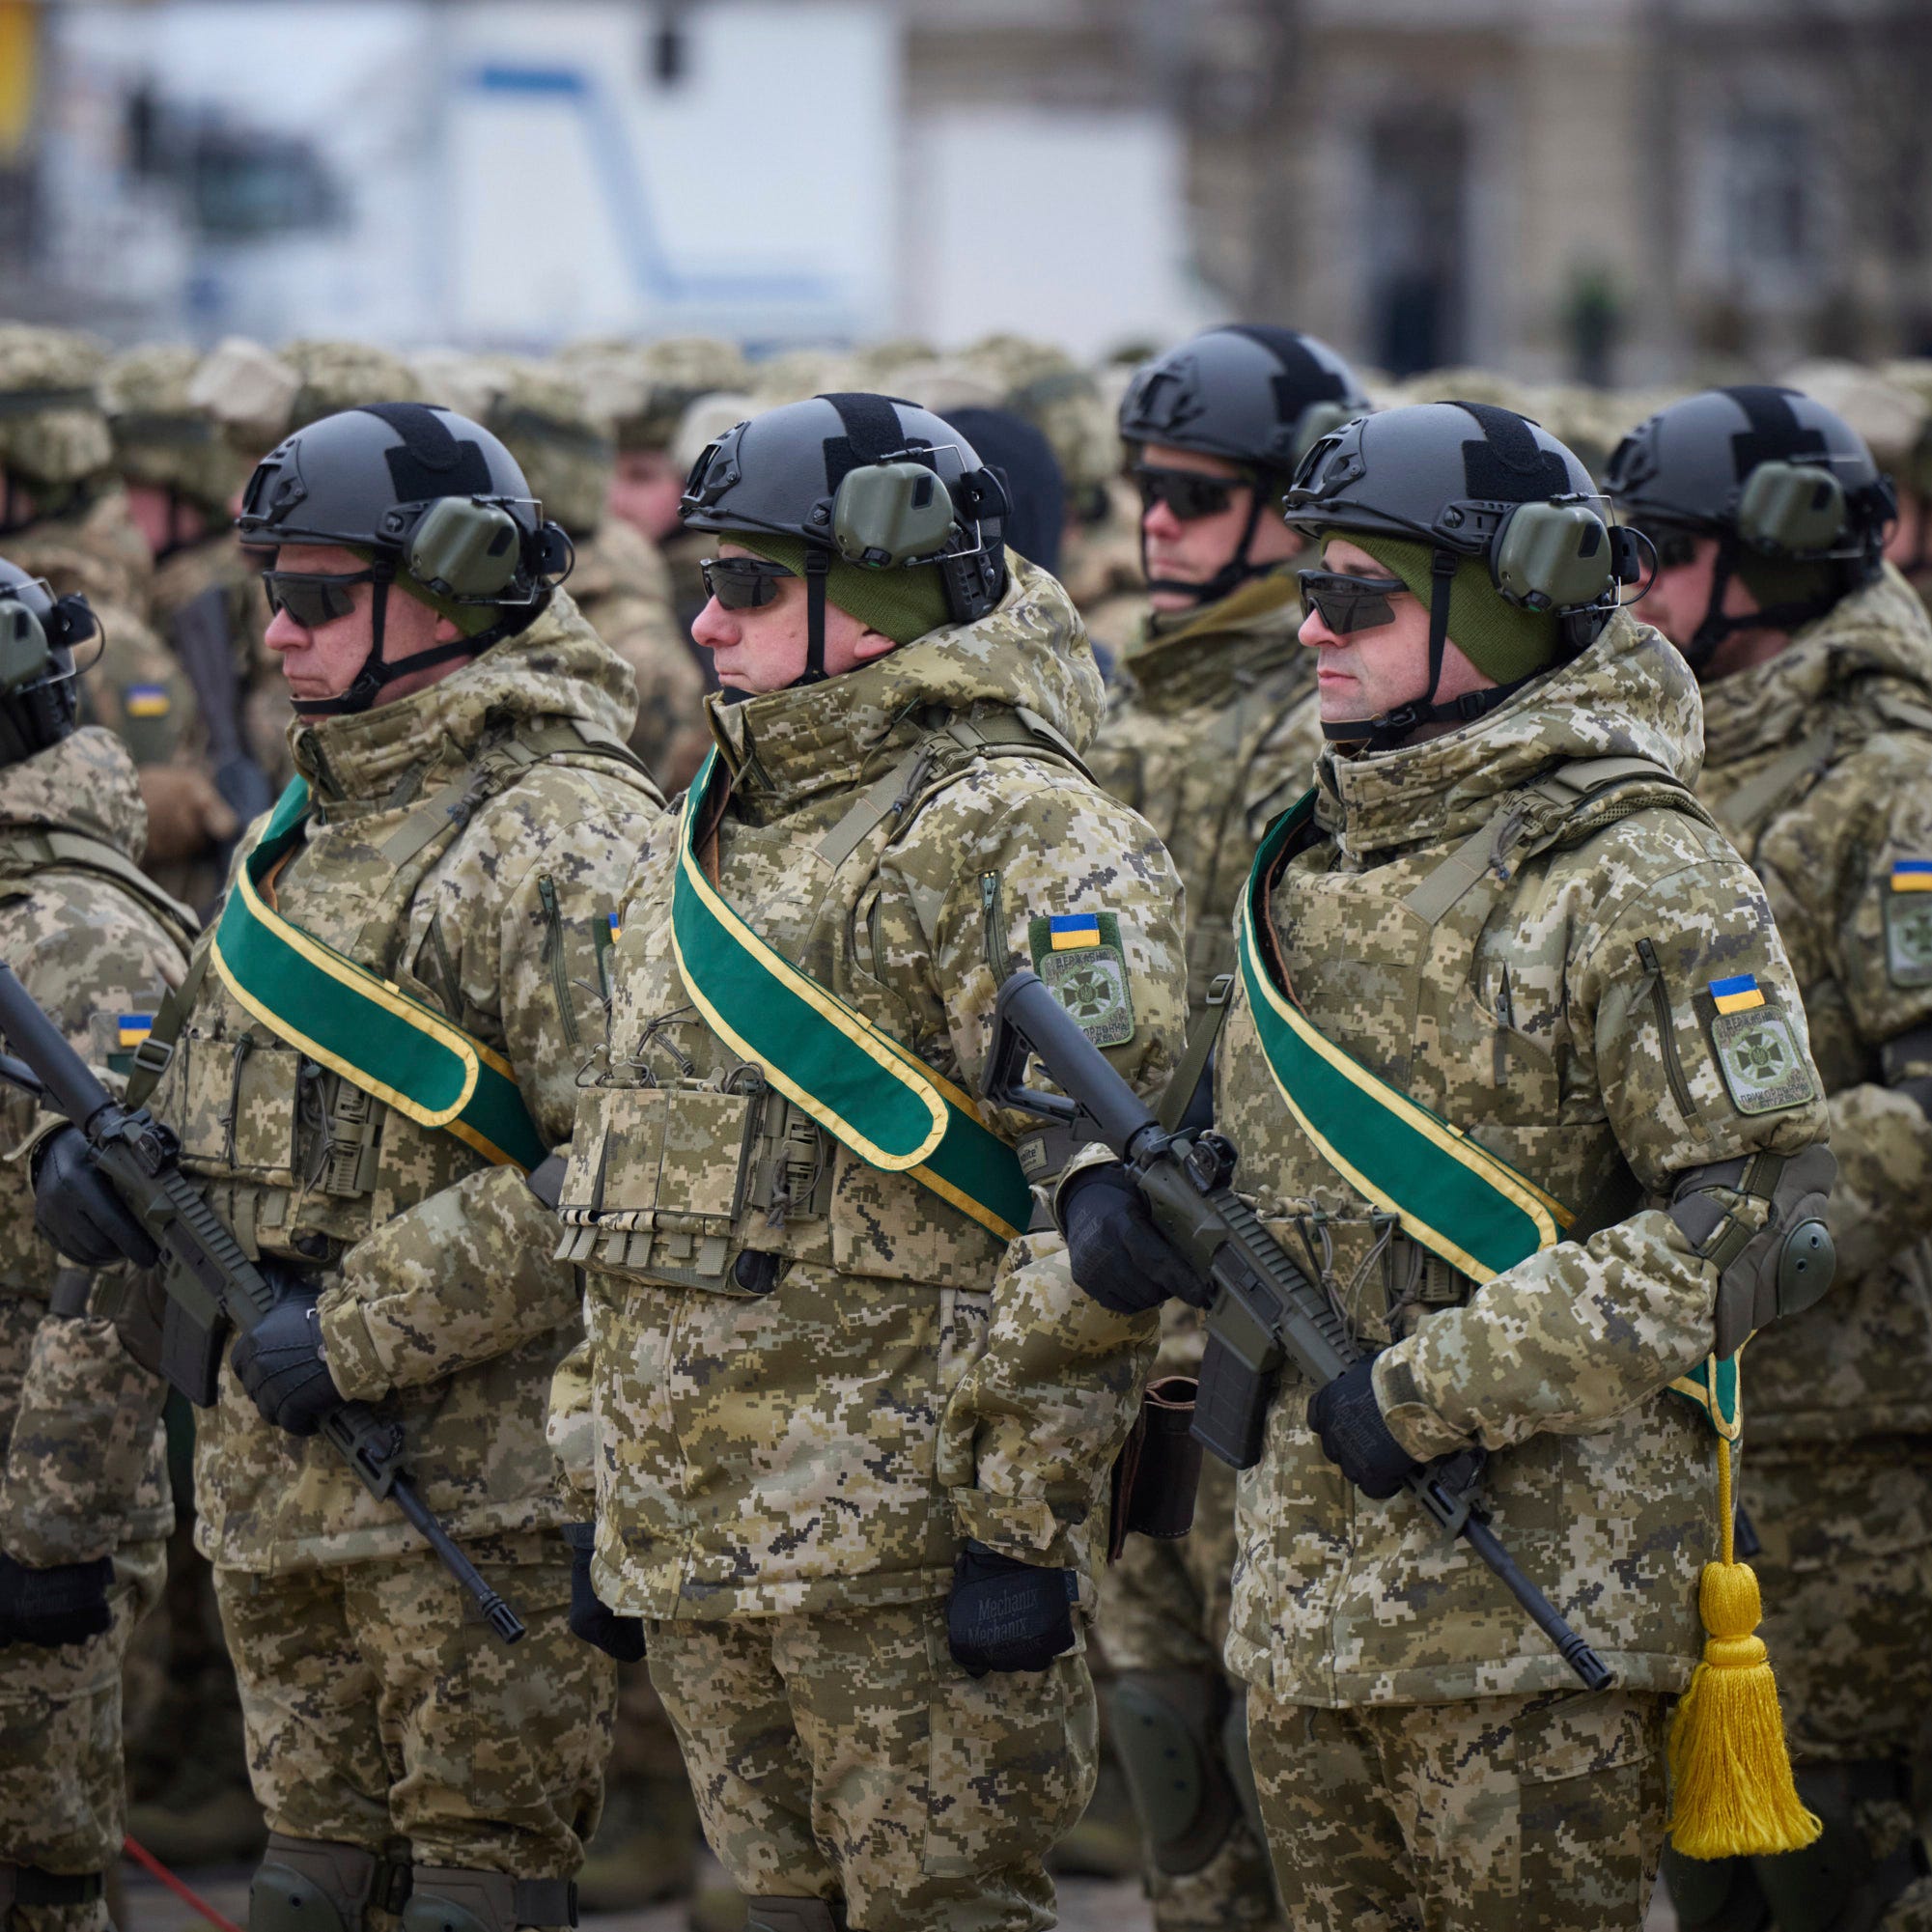 Ukrainian soldiers line up during a commemorative event on the one-year anniversary of the war with Russia in Kyiv, Ukraine, Friday, Feb. 24, 2023.